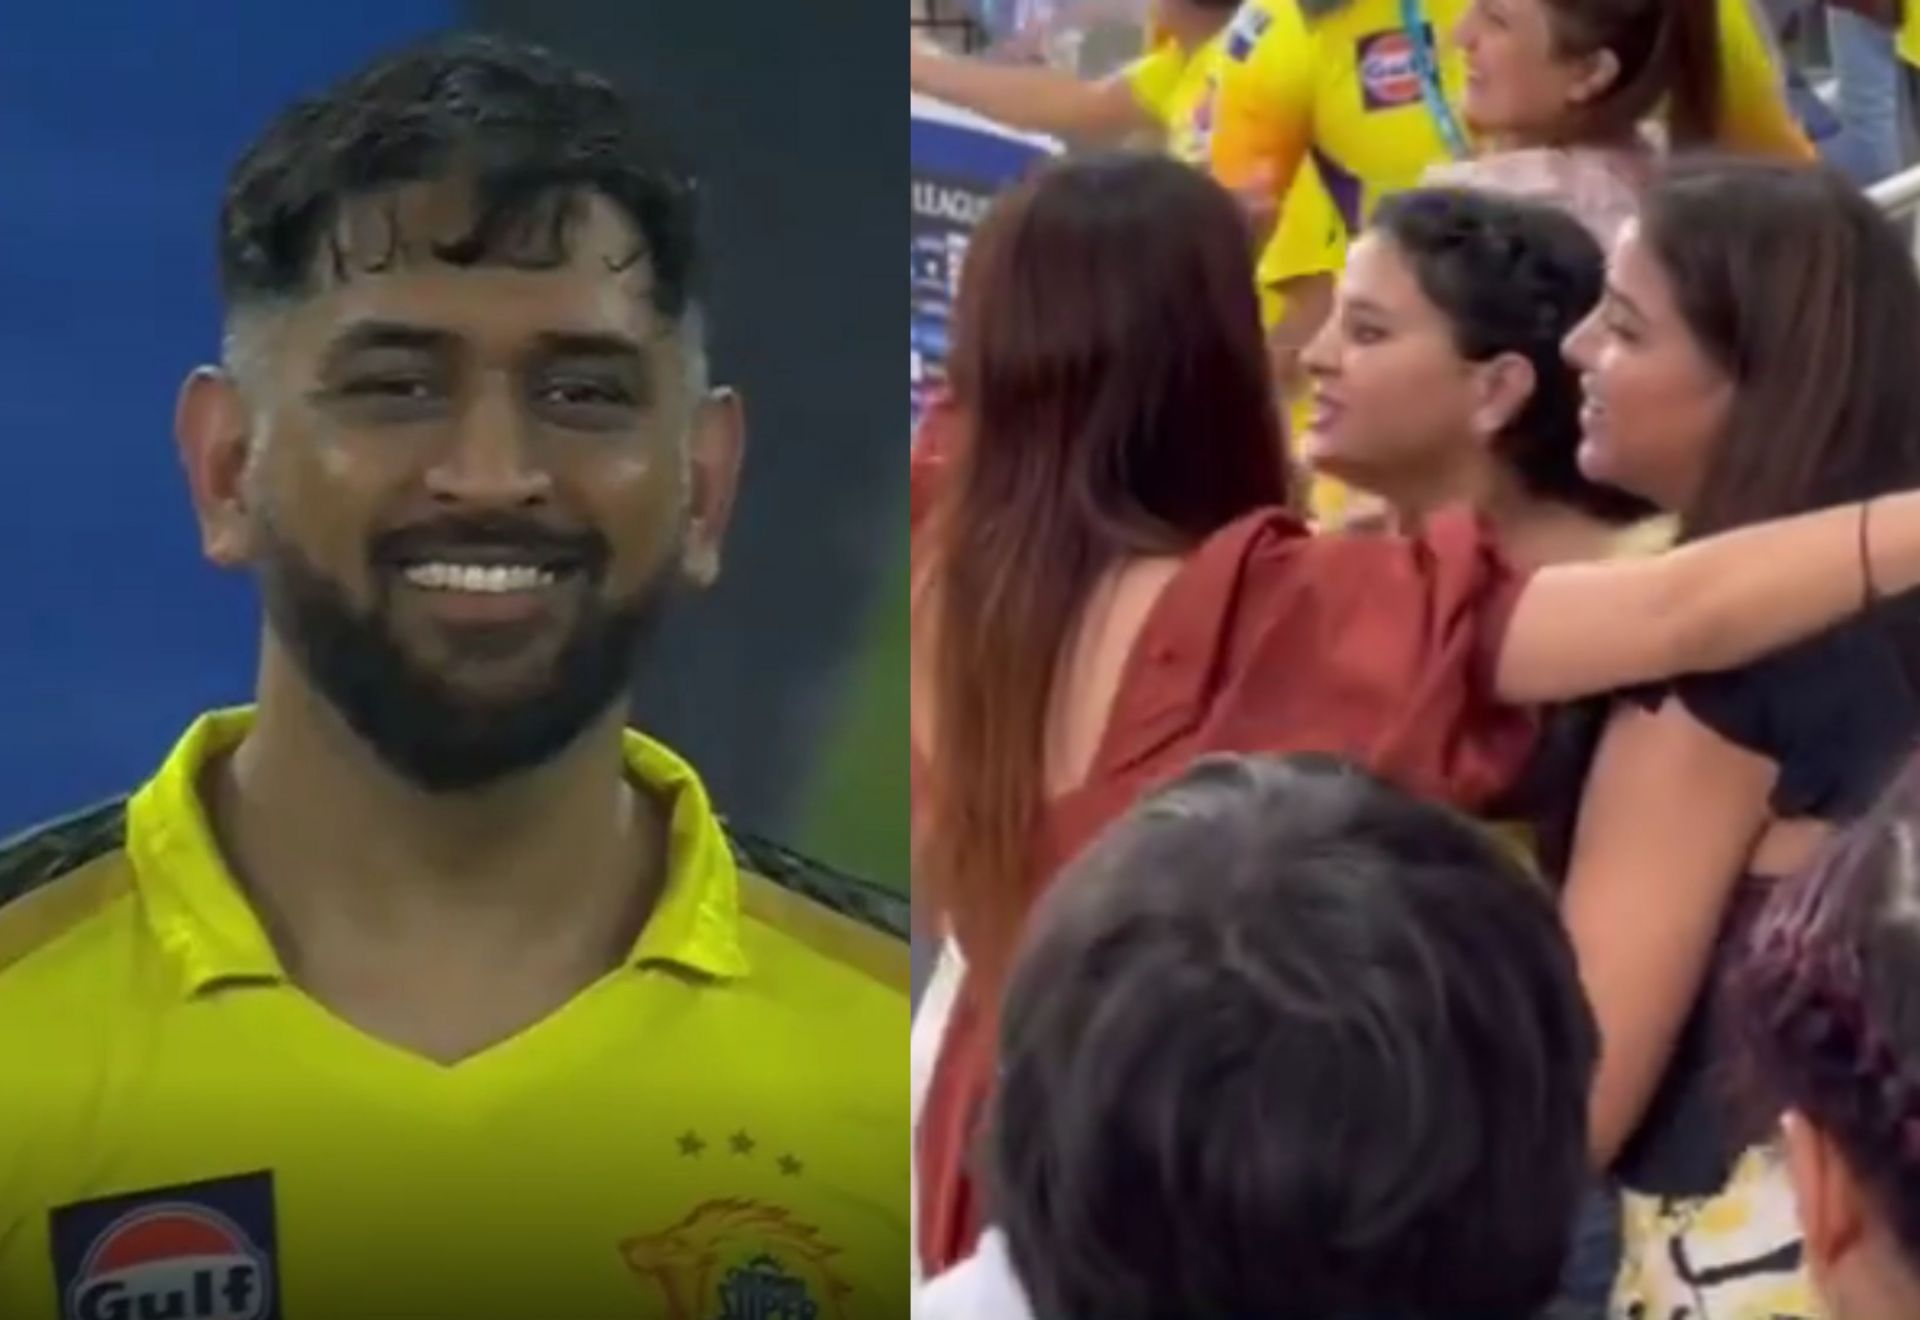 &lt;a href=&#039;https://www.sportskeeda.com/player/ms-dhoni&#039; target=&#039;_blank&#039; rel=&#039;noopener noreferrer&#039;&gt;MS Dhoni&lt;/a&gt; and the family members of CSK players